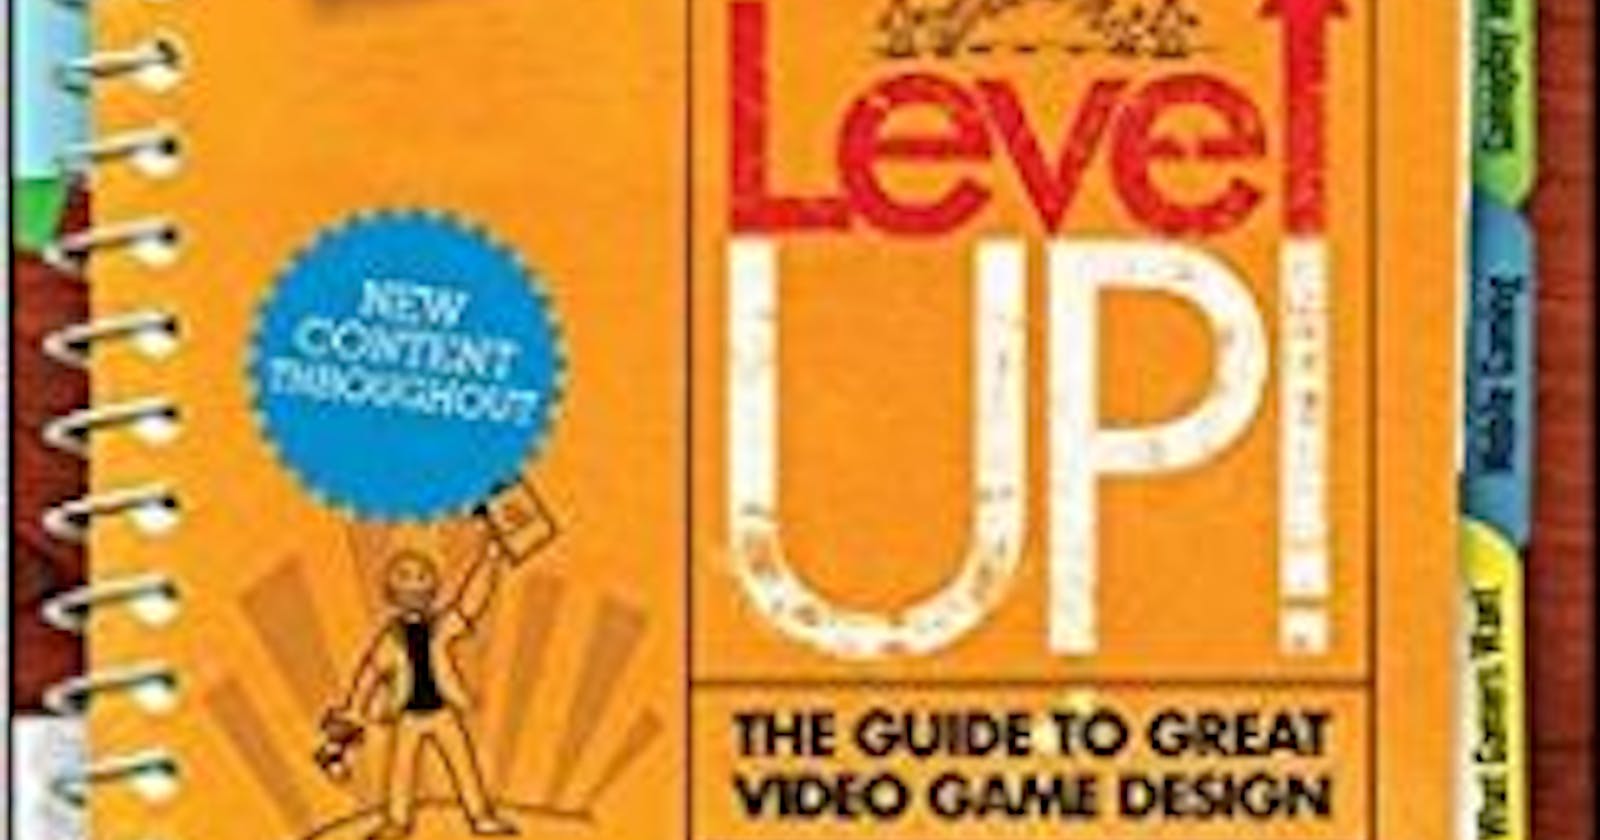 Book Review: Level Up! The Guide to Great Video Game Design, 2nd Edition